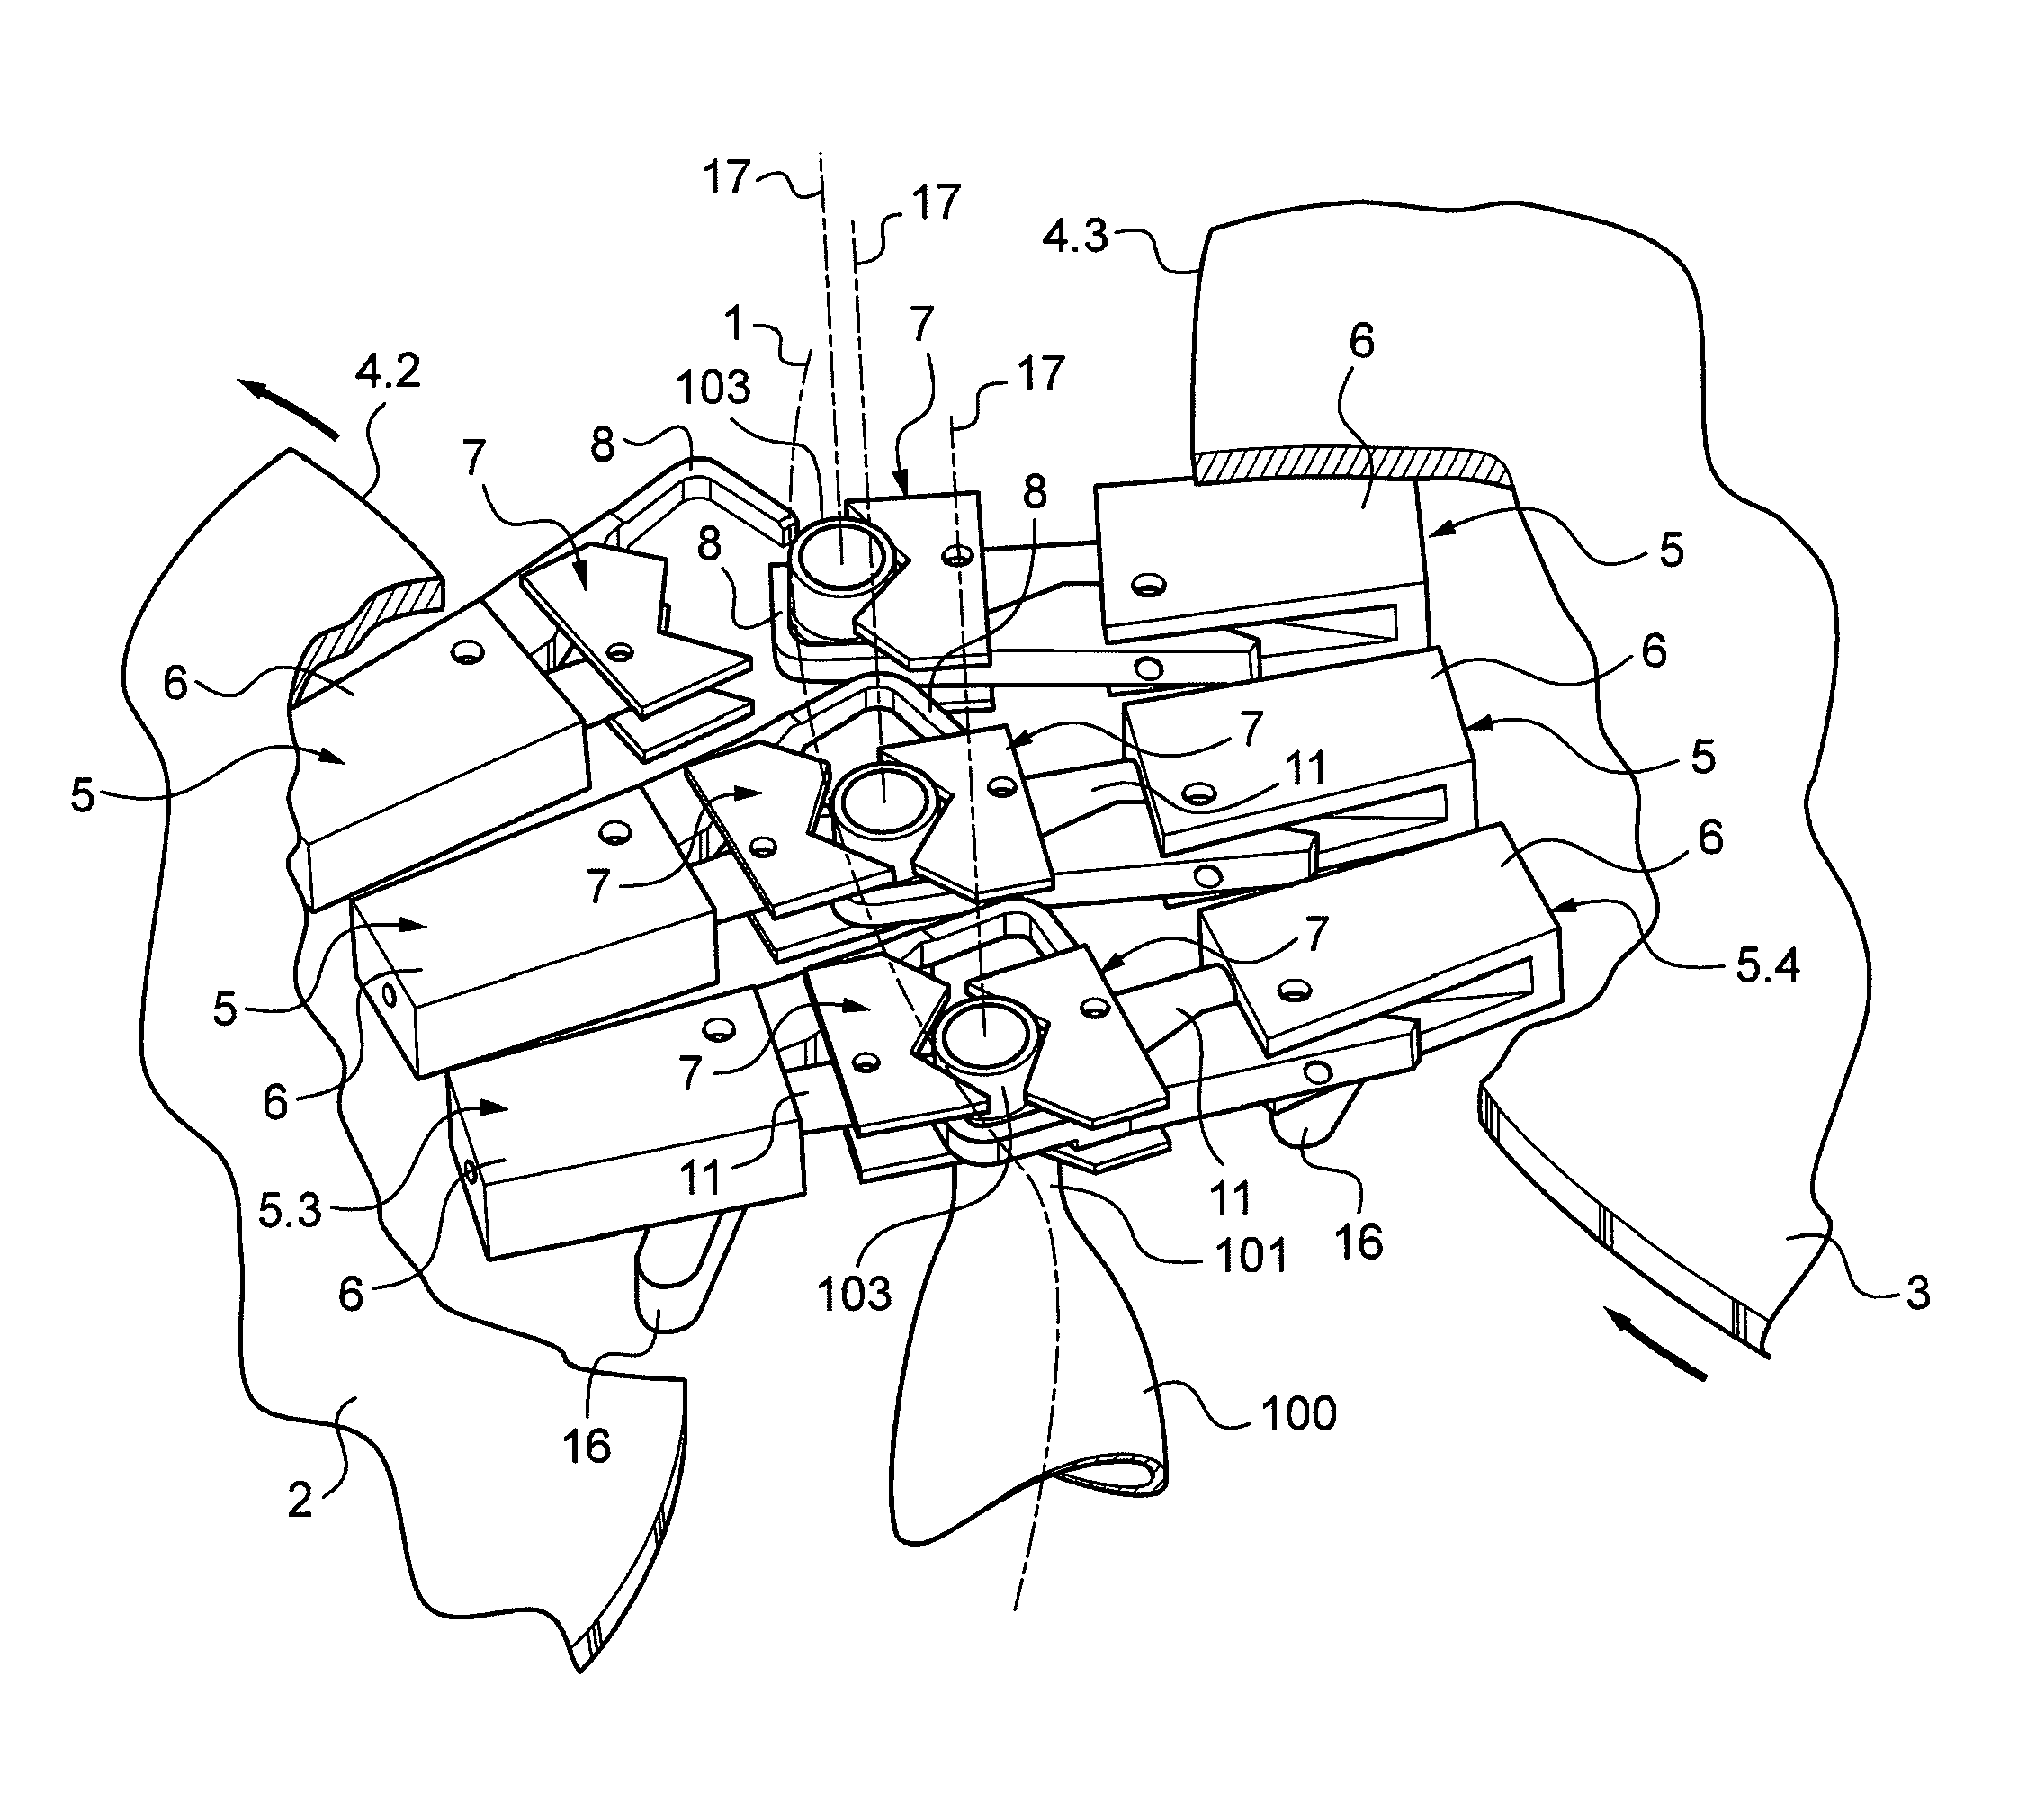 Method of positioning containers in a container processing installation, a corresponding positioning device, and an installation including such devices